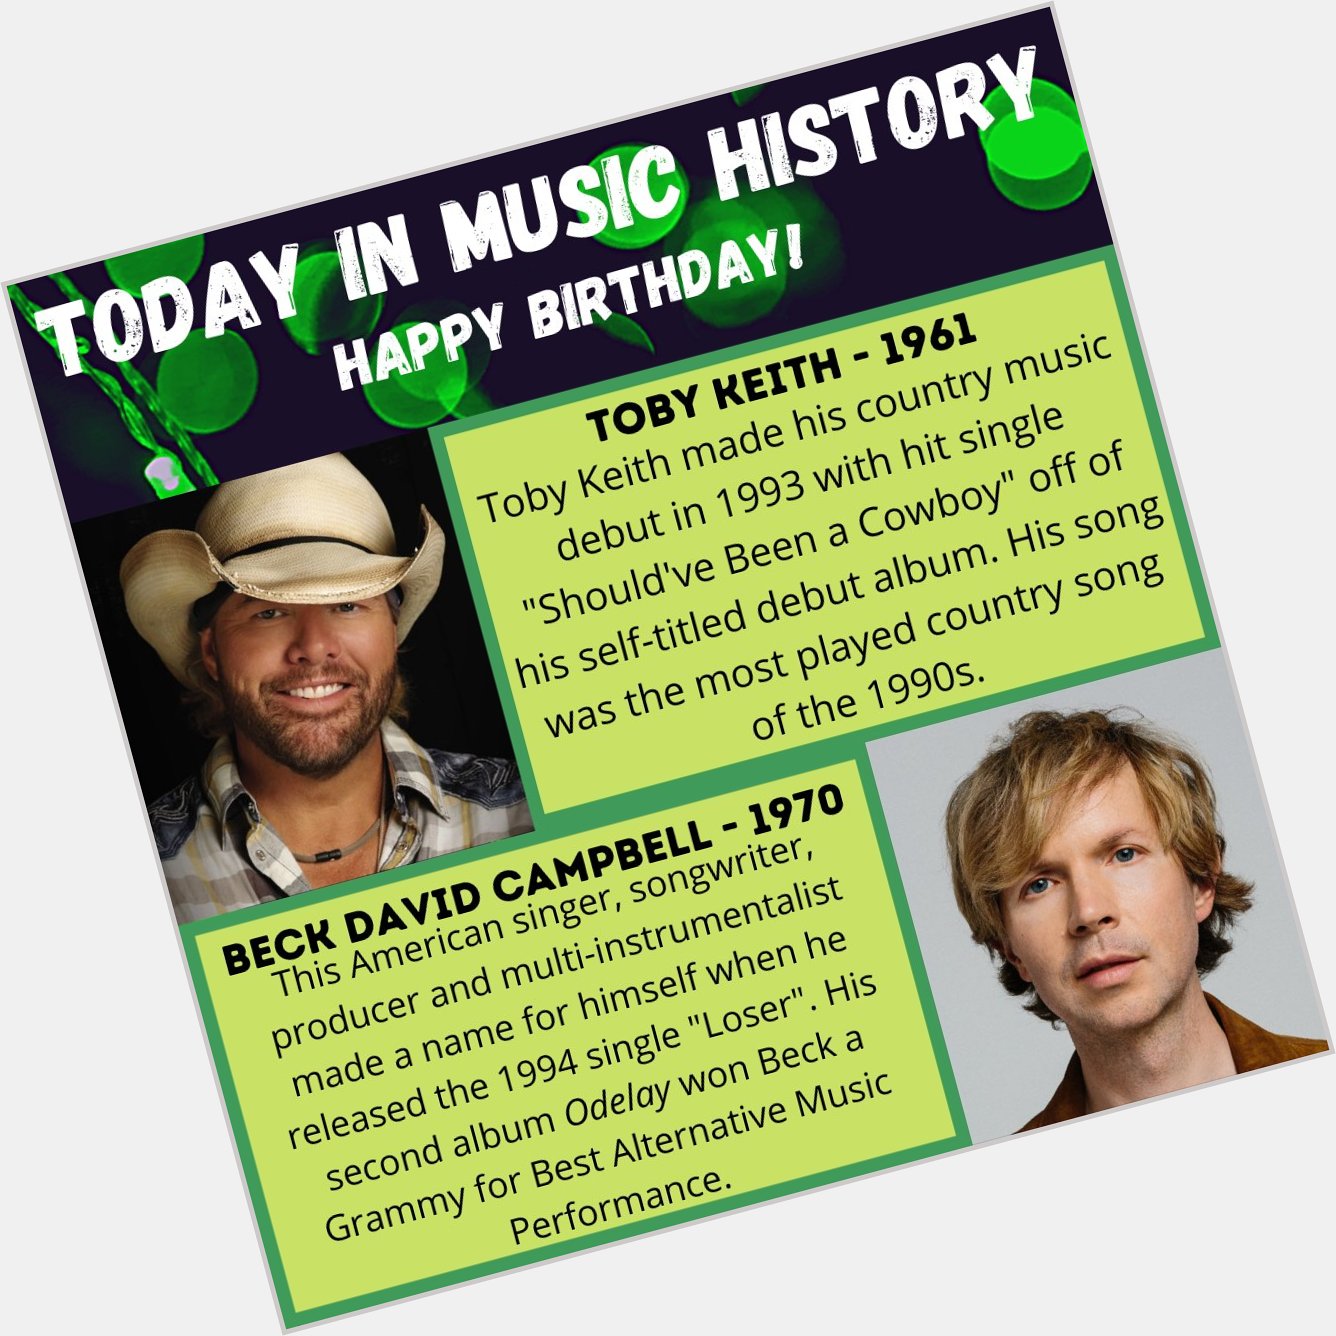 Happy Birthday guys! Any Toby Keith or Beck fans? 